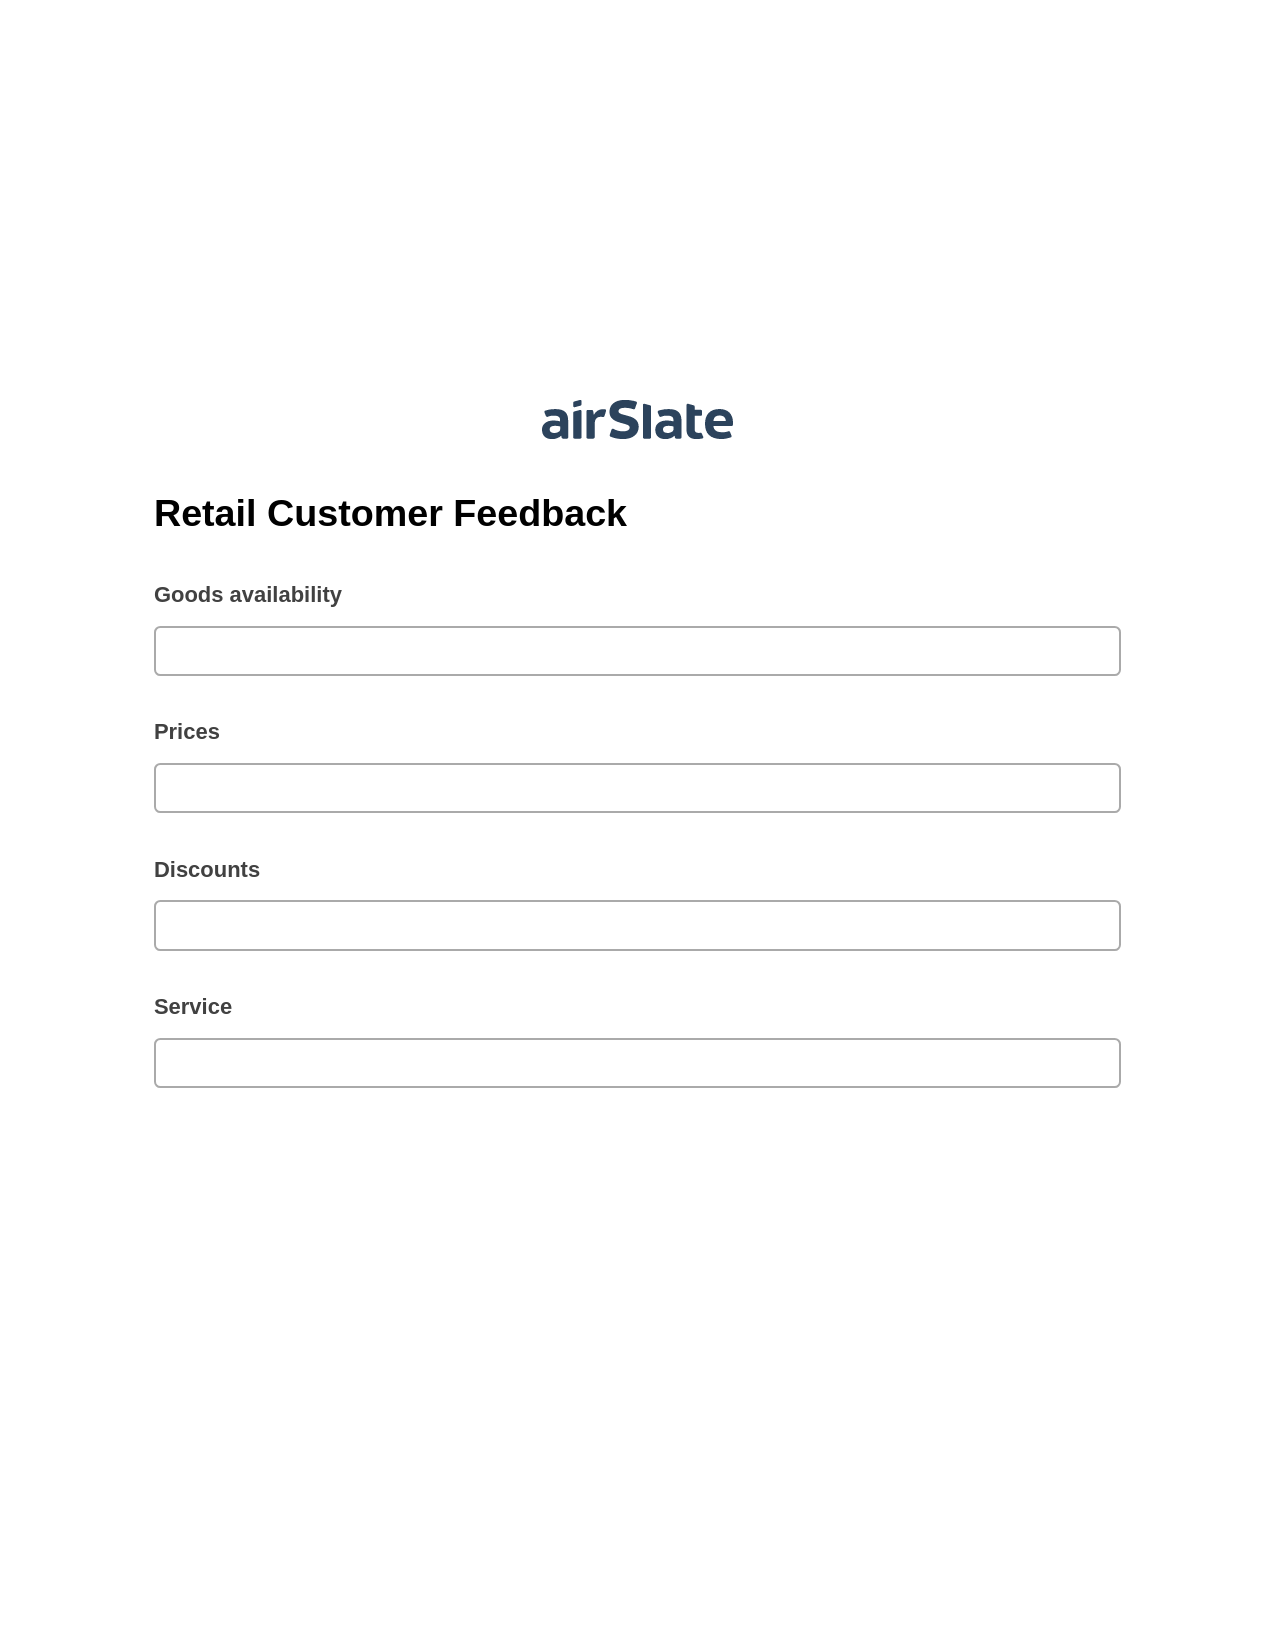 Retail Customer Feedback Pre-fill from another Slate Bot, Reminder Bot, Export to Salesforce Bot